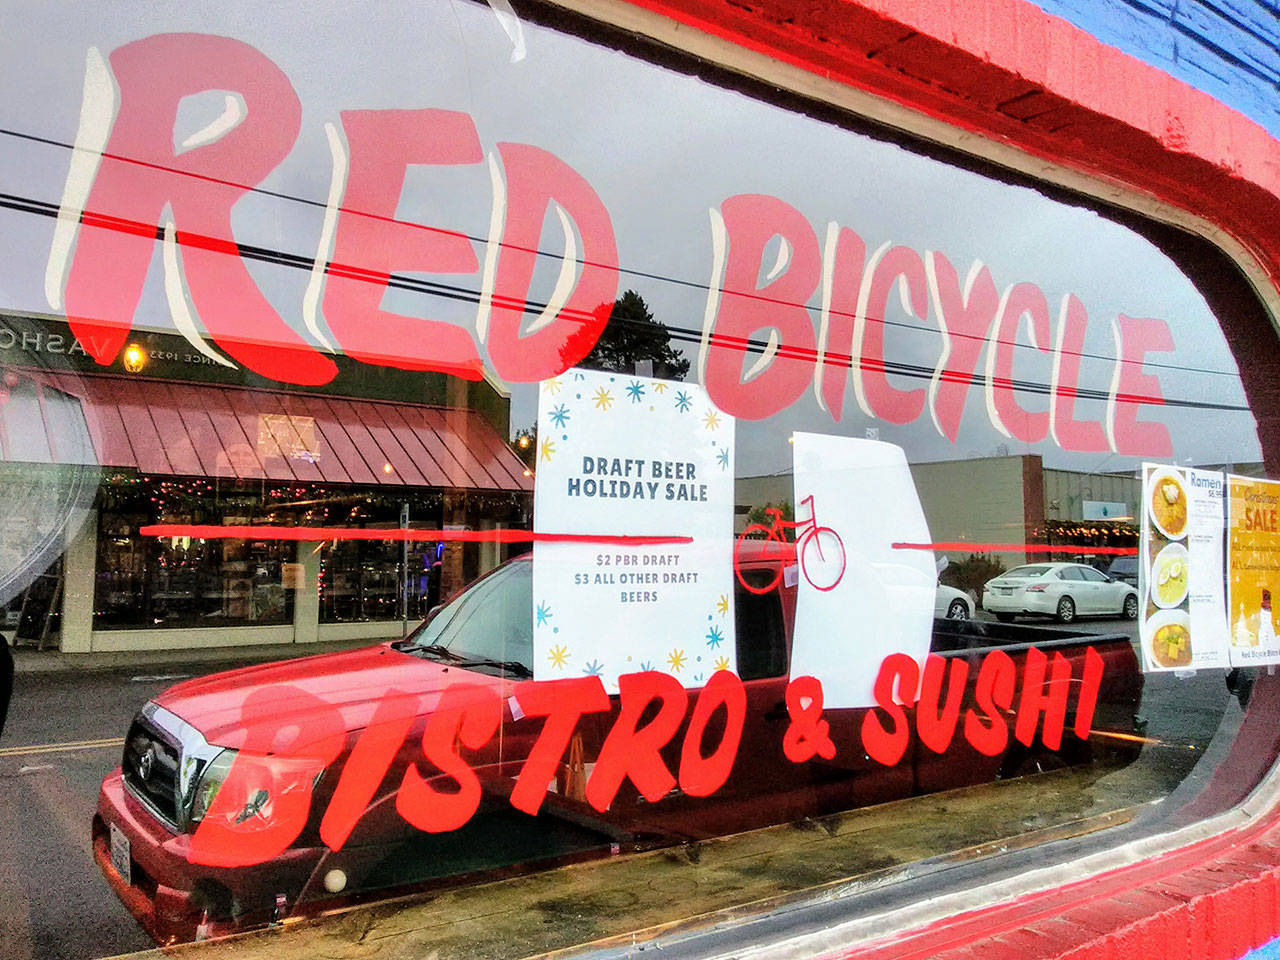 The Red Bicycle Bistro and Sushi (Paul Rowley/Staff Photo).